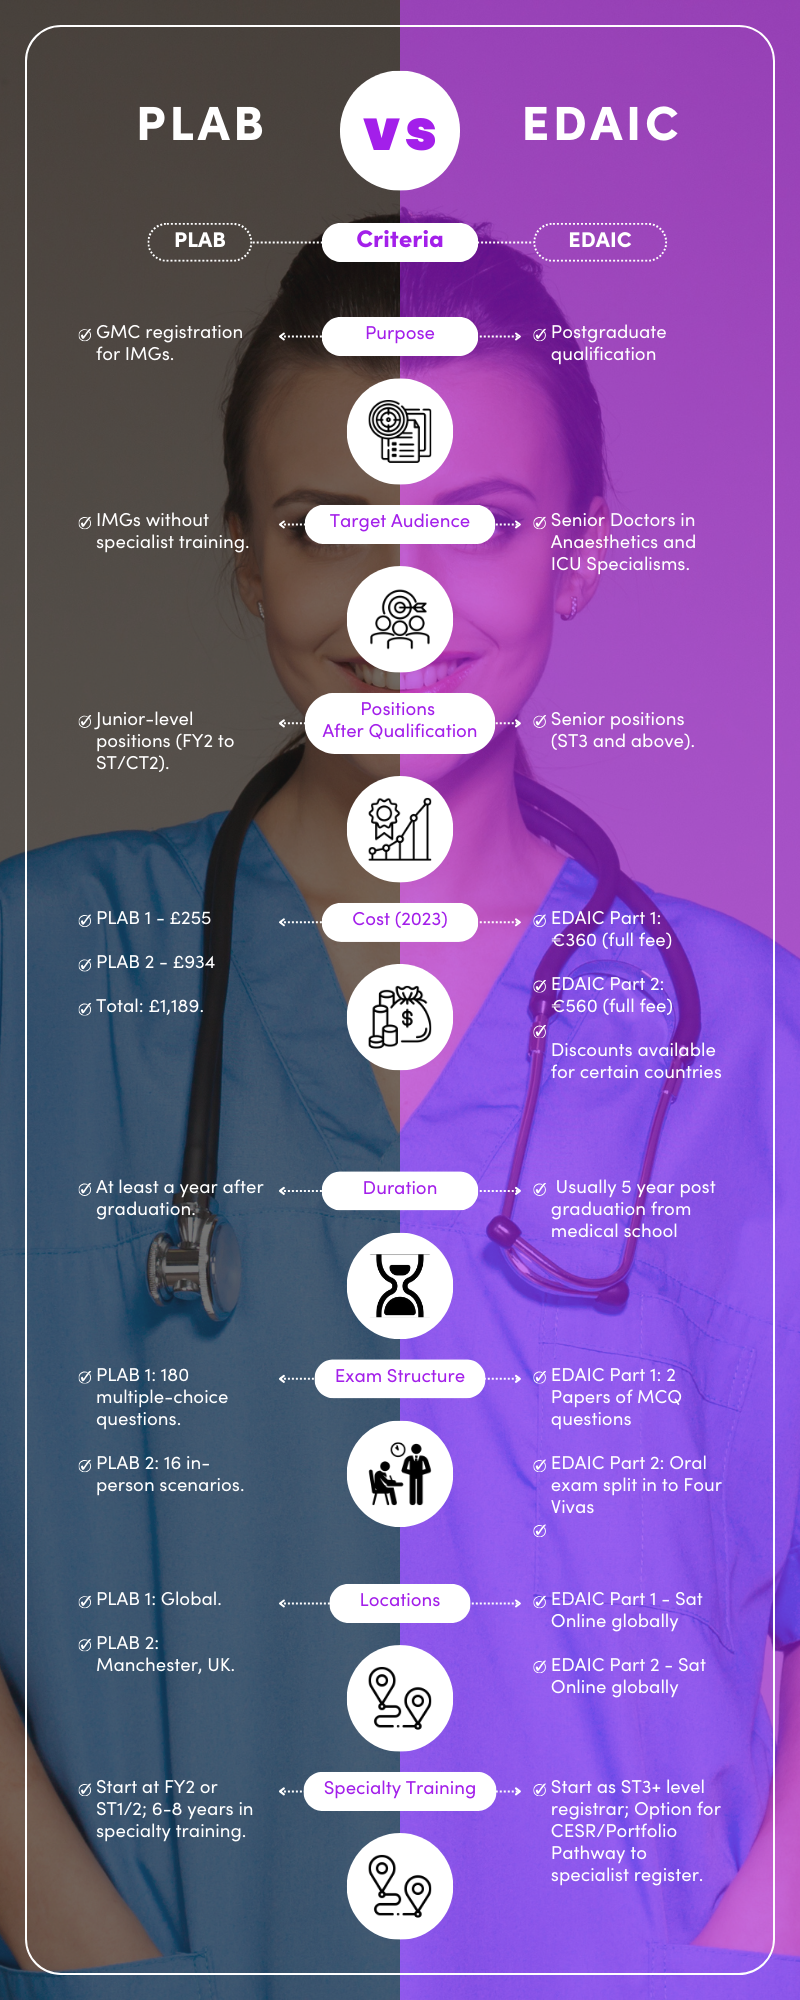 Infographic detailing the differences between EDAIC and PLAB based on criteria including prices, locations, exam structure, duration and target audience.e